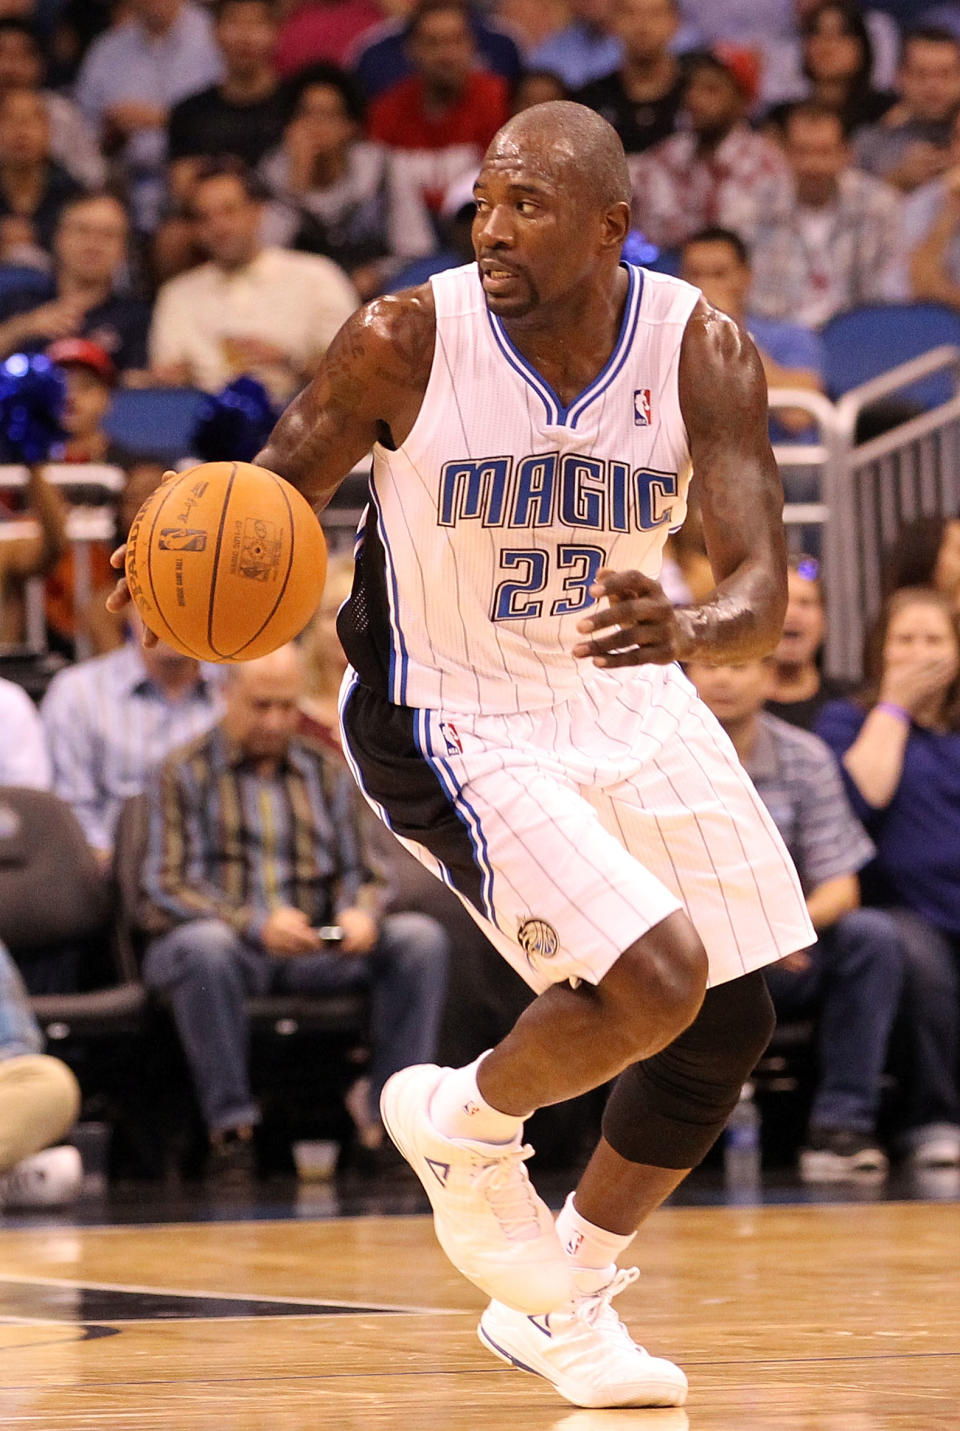 ORLANDO, FL - FEBRUARY 08: Jason Richardson #23 of the Orlando Magic looks to pass during the game agaisnt the Miami Heat at Amway Center on February 8, 2012 in Orlando, Florida. NOTE TO USER: User expressly acknowledges and agrees that, by downloading and or using this Photograph, user is consenting to the terms and conditions of the Getty Images License Agreement. (Photo by Sam Greenwood/Getty Images)